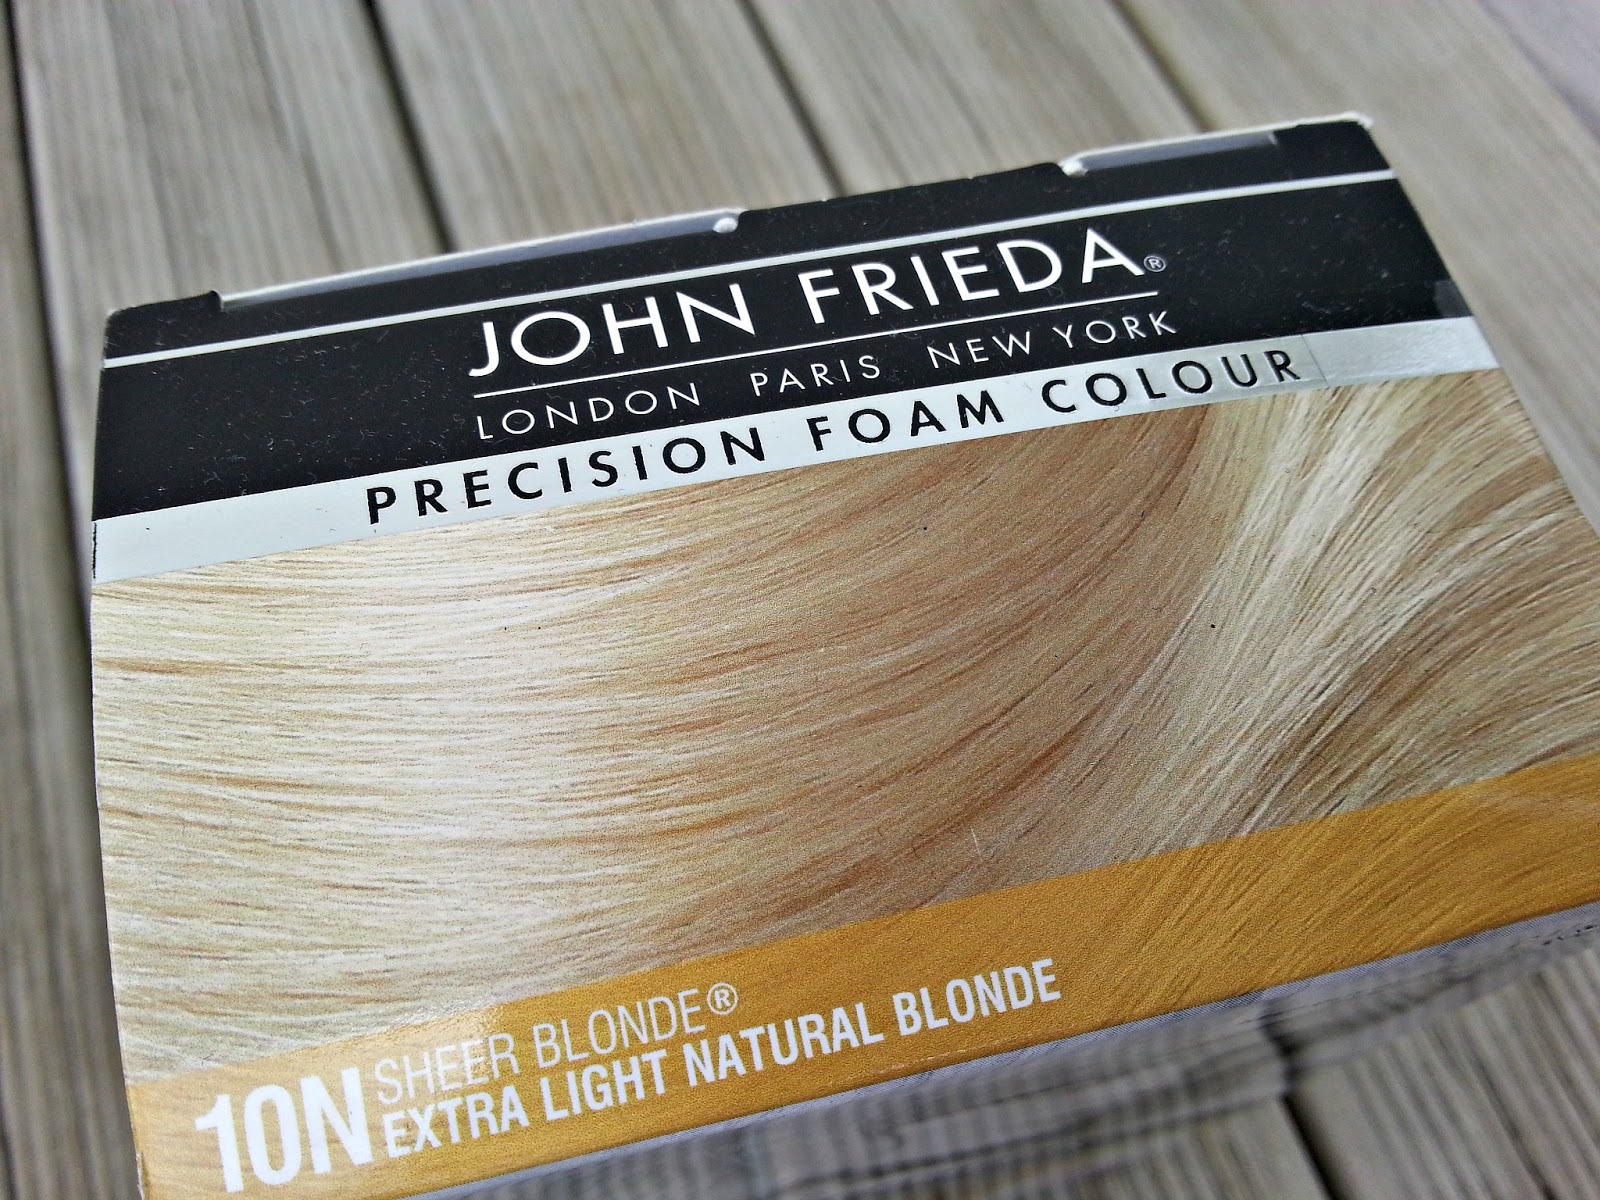 7. John Frieda Precision Foam Colour, Medium Natural Blonde 8N, Full-coverage Hair Color Kit, with Thick Foam for Deep Color Saturation - wide 11